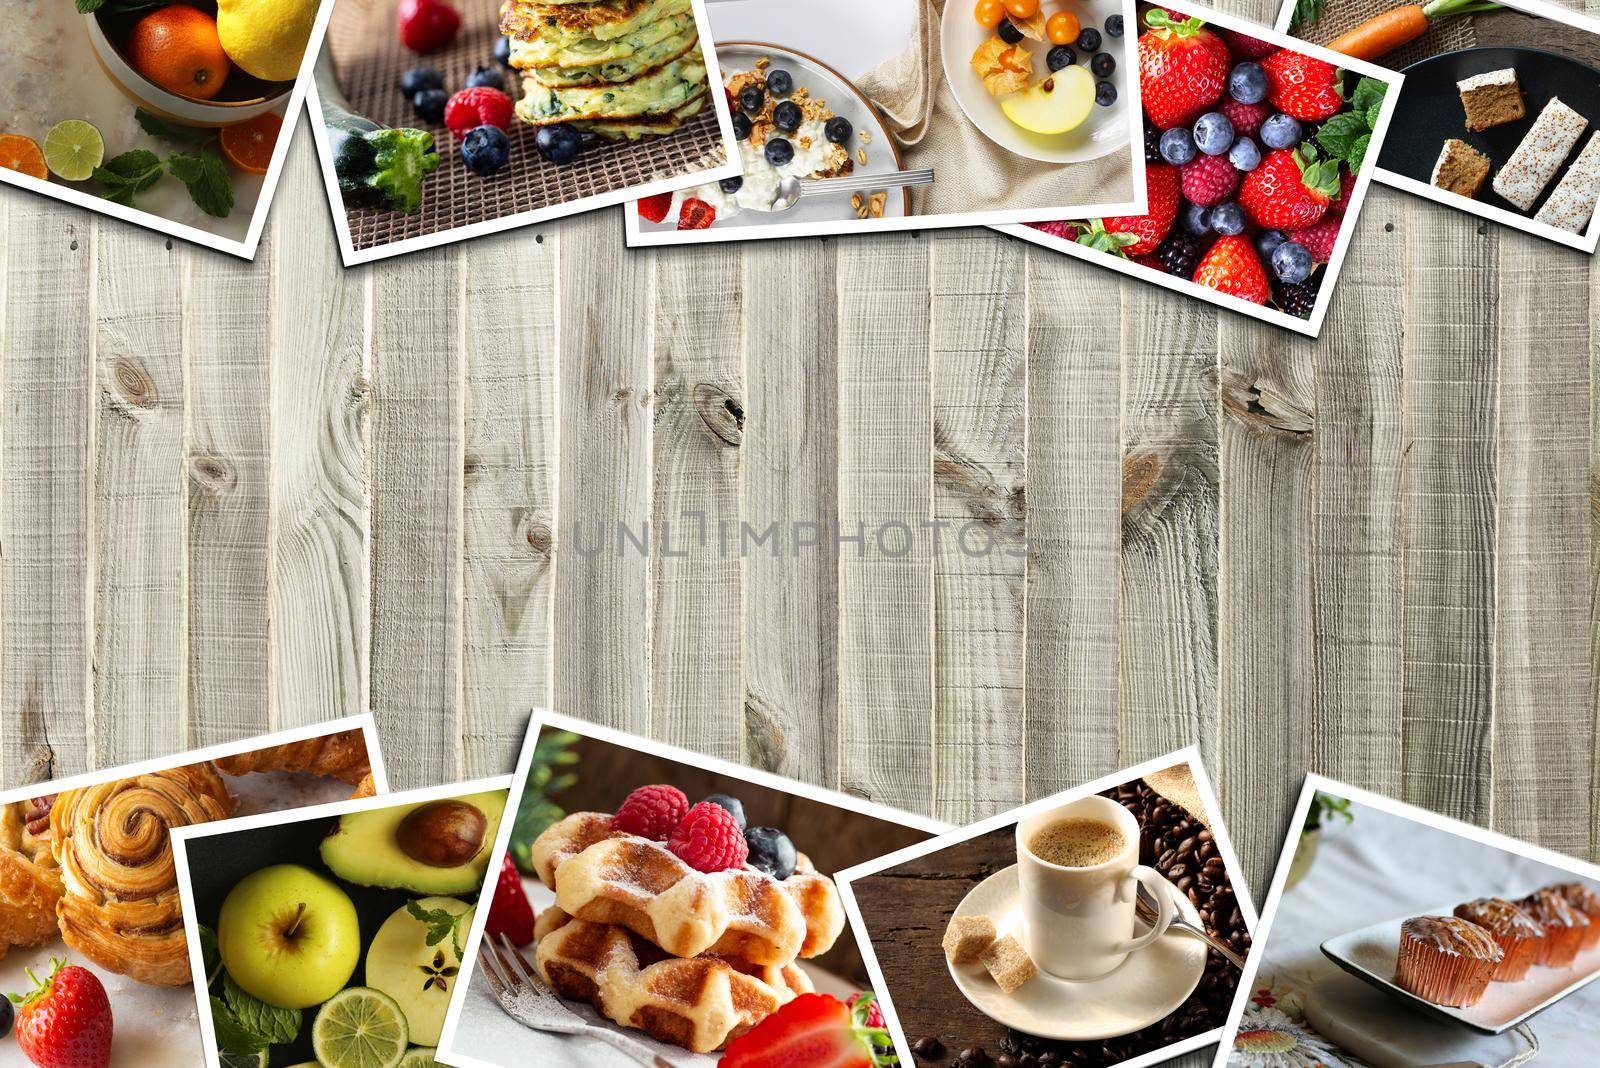 Healthy food photo collage. Collage of different testy dessert, fruits on wooden background. Healthy breakfast concept